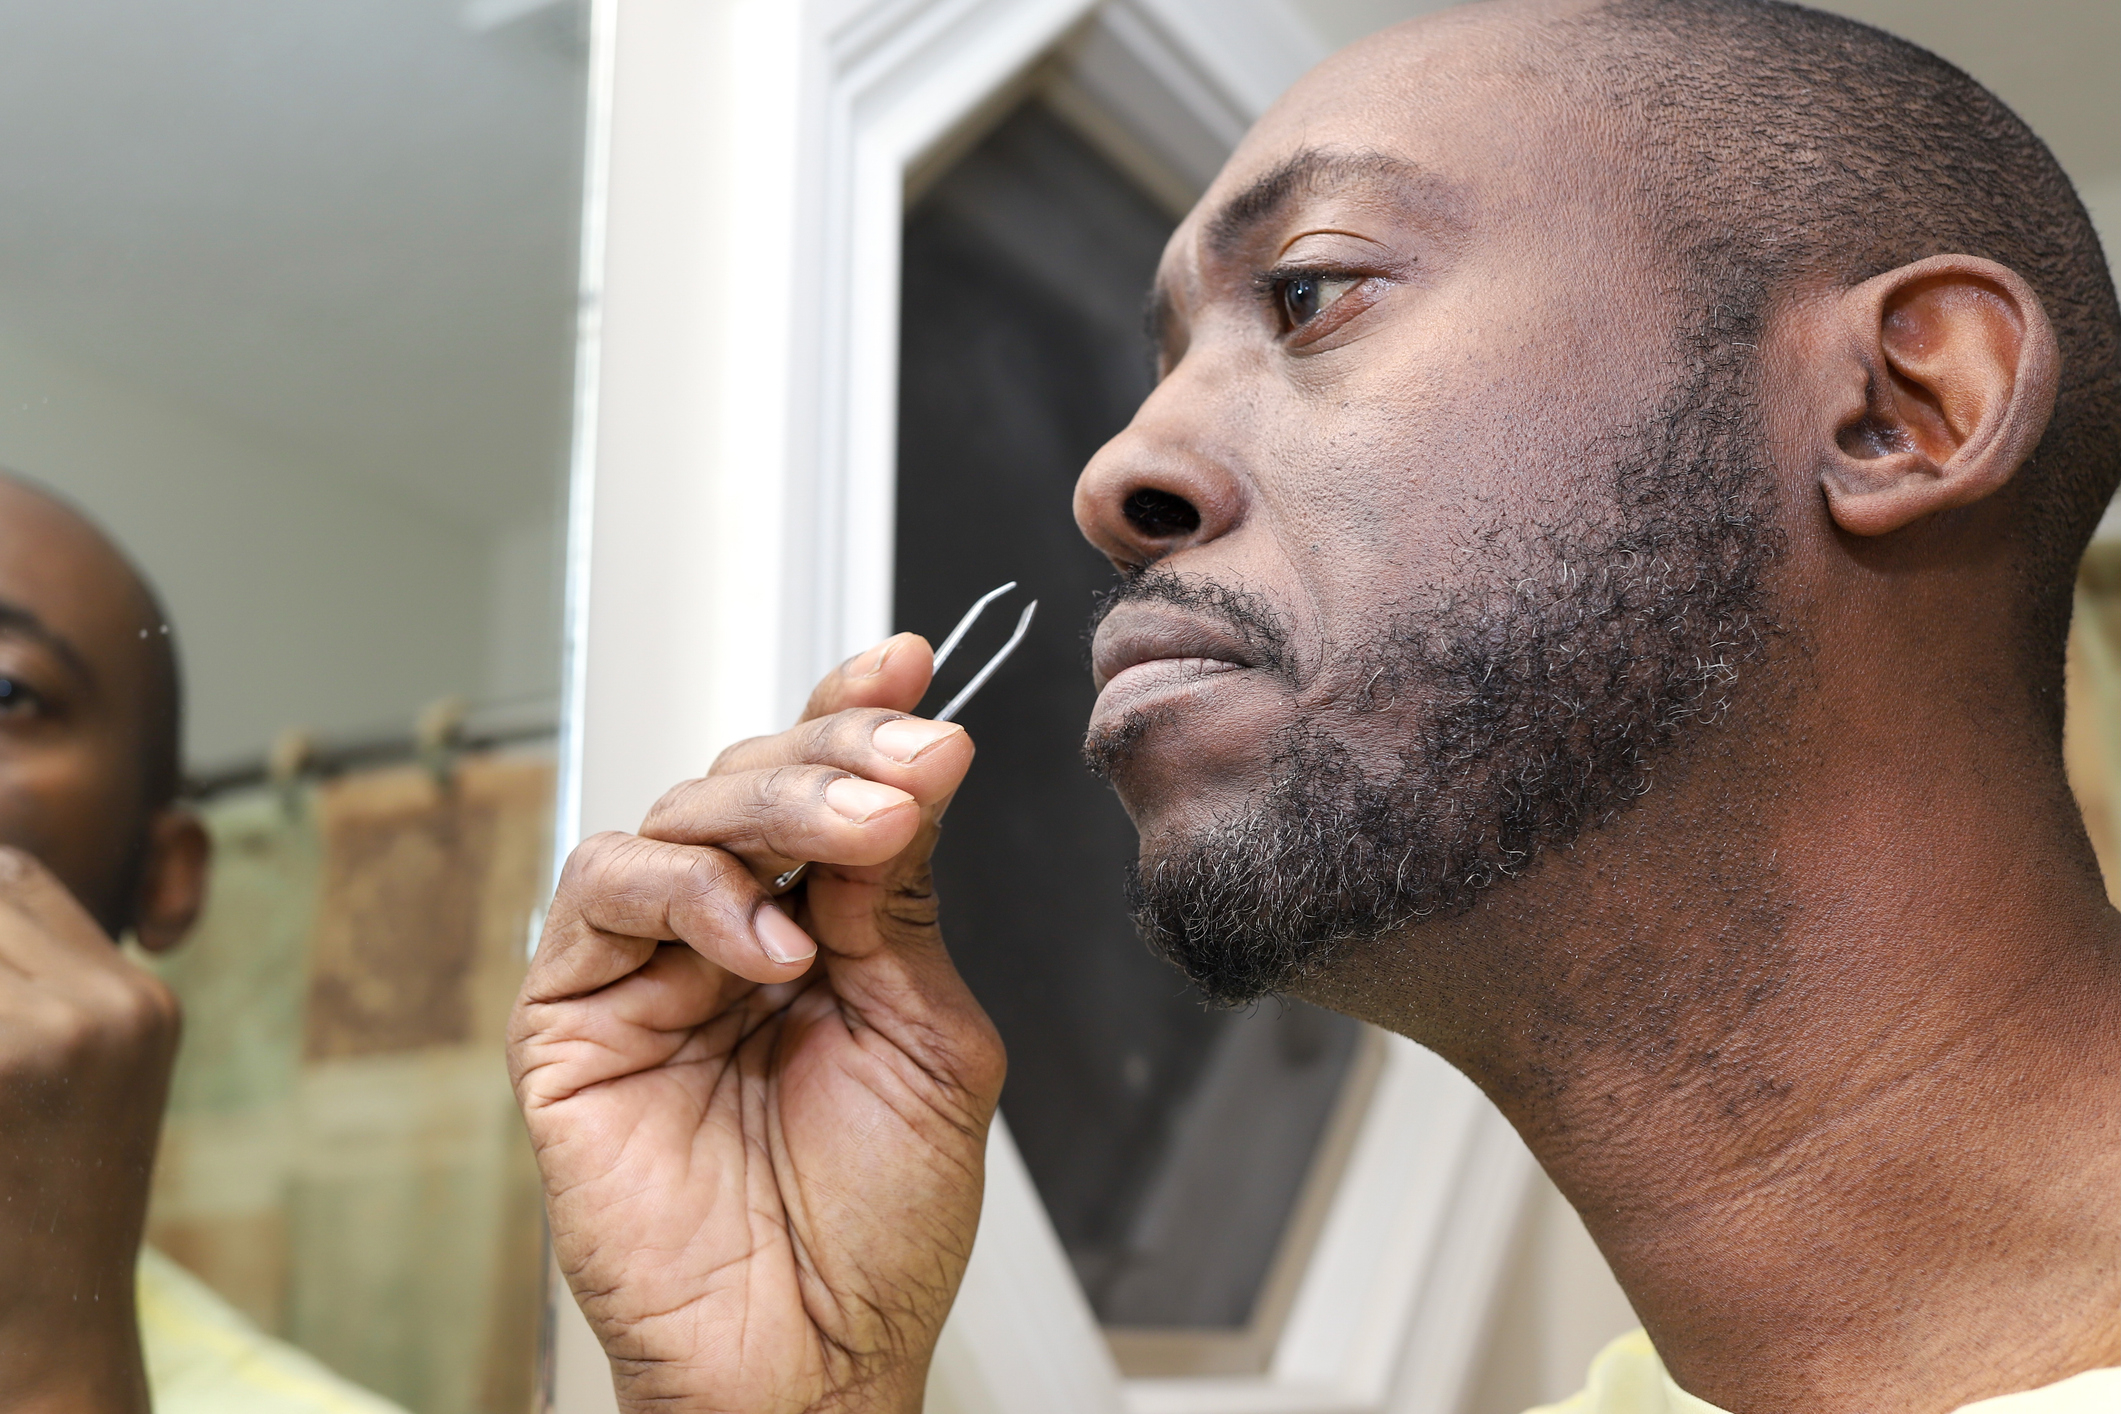 A man stands in front of a bathroom mirror using tweezers to groom his beard